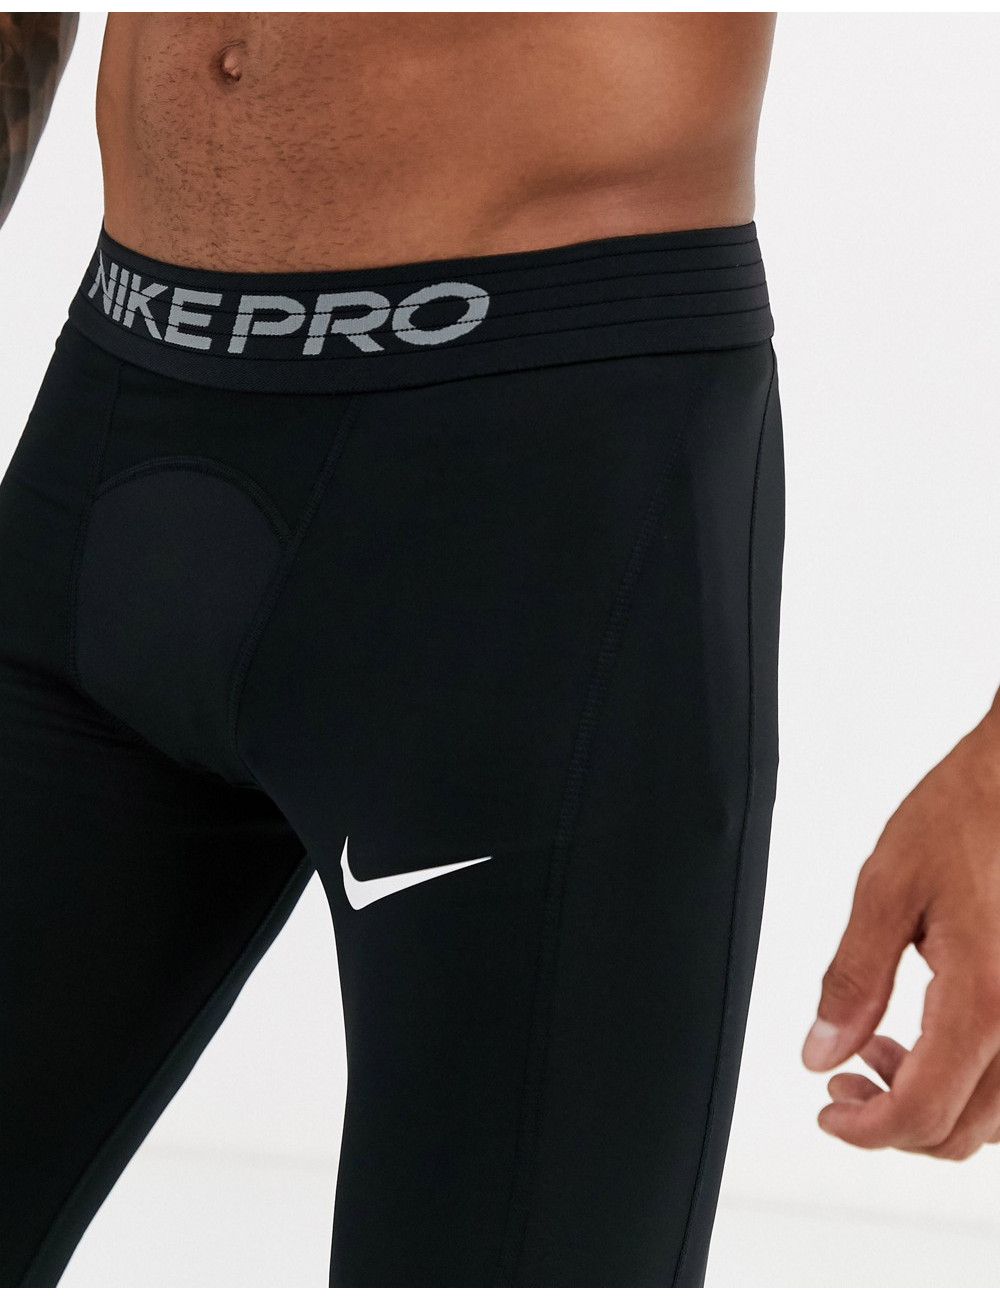 Nike Pro Training tights in...